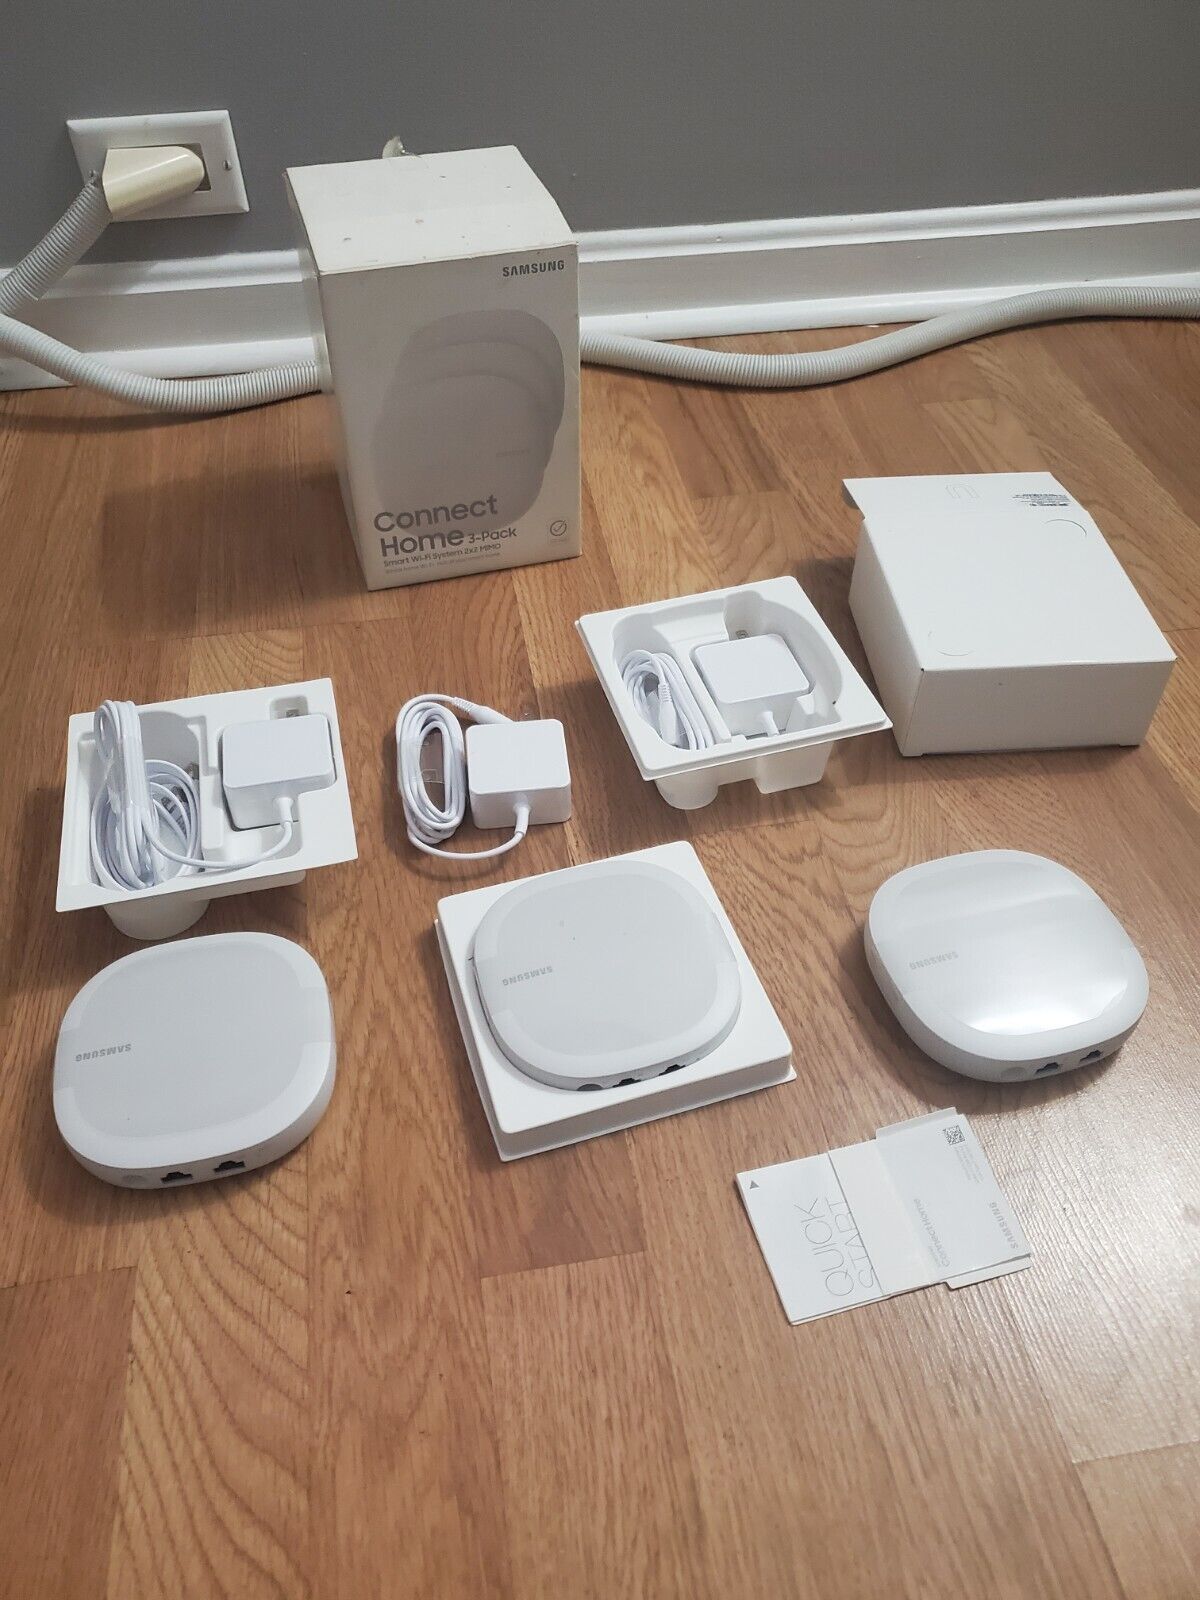 Samsung CONNECT HOME 3-Pack Smart Whole Home Wi-Fi System 2x2 MIMO (ET-WV520) 